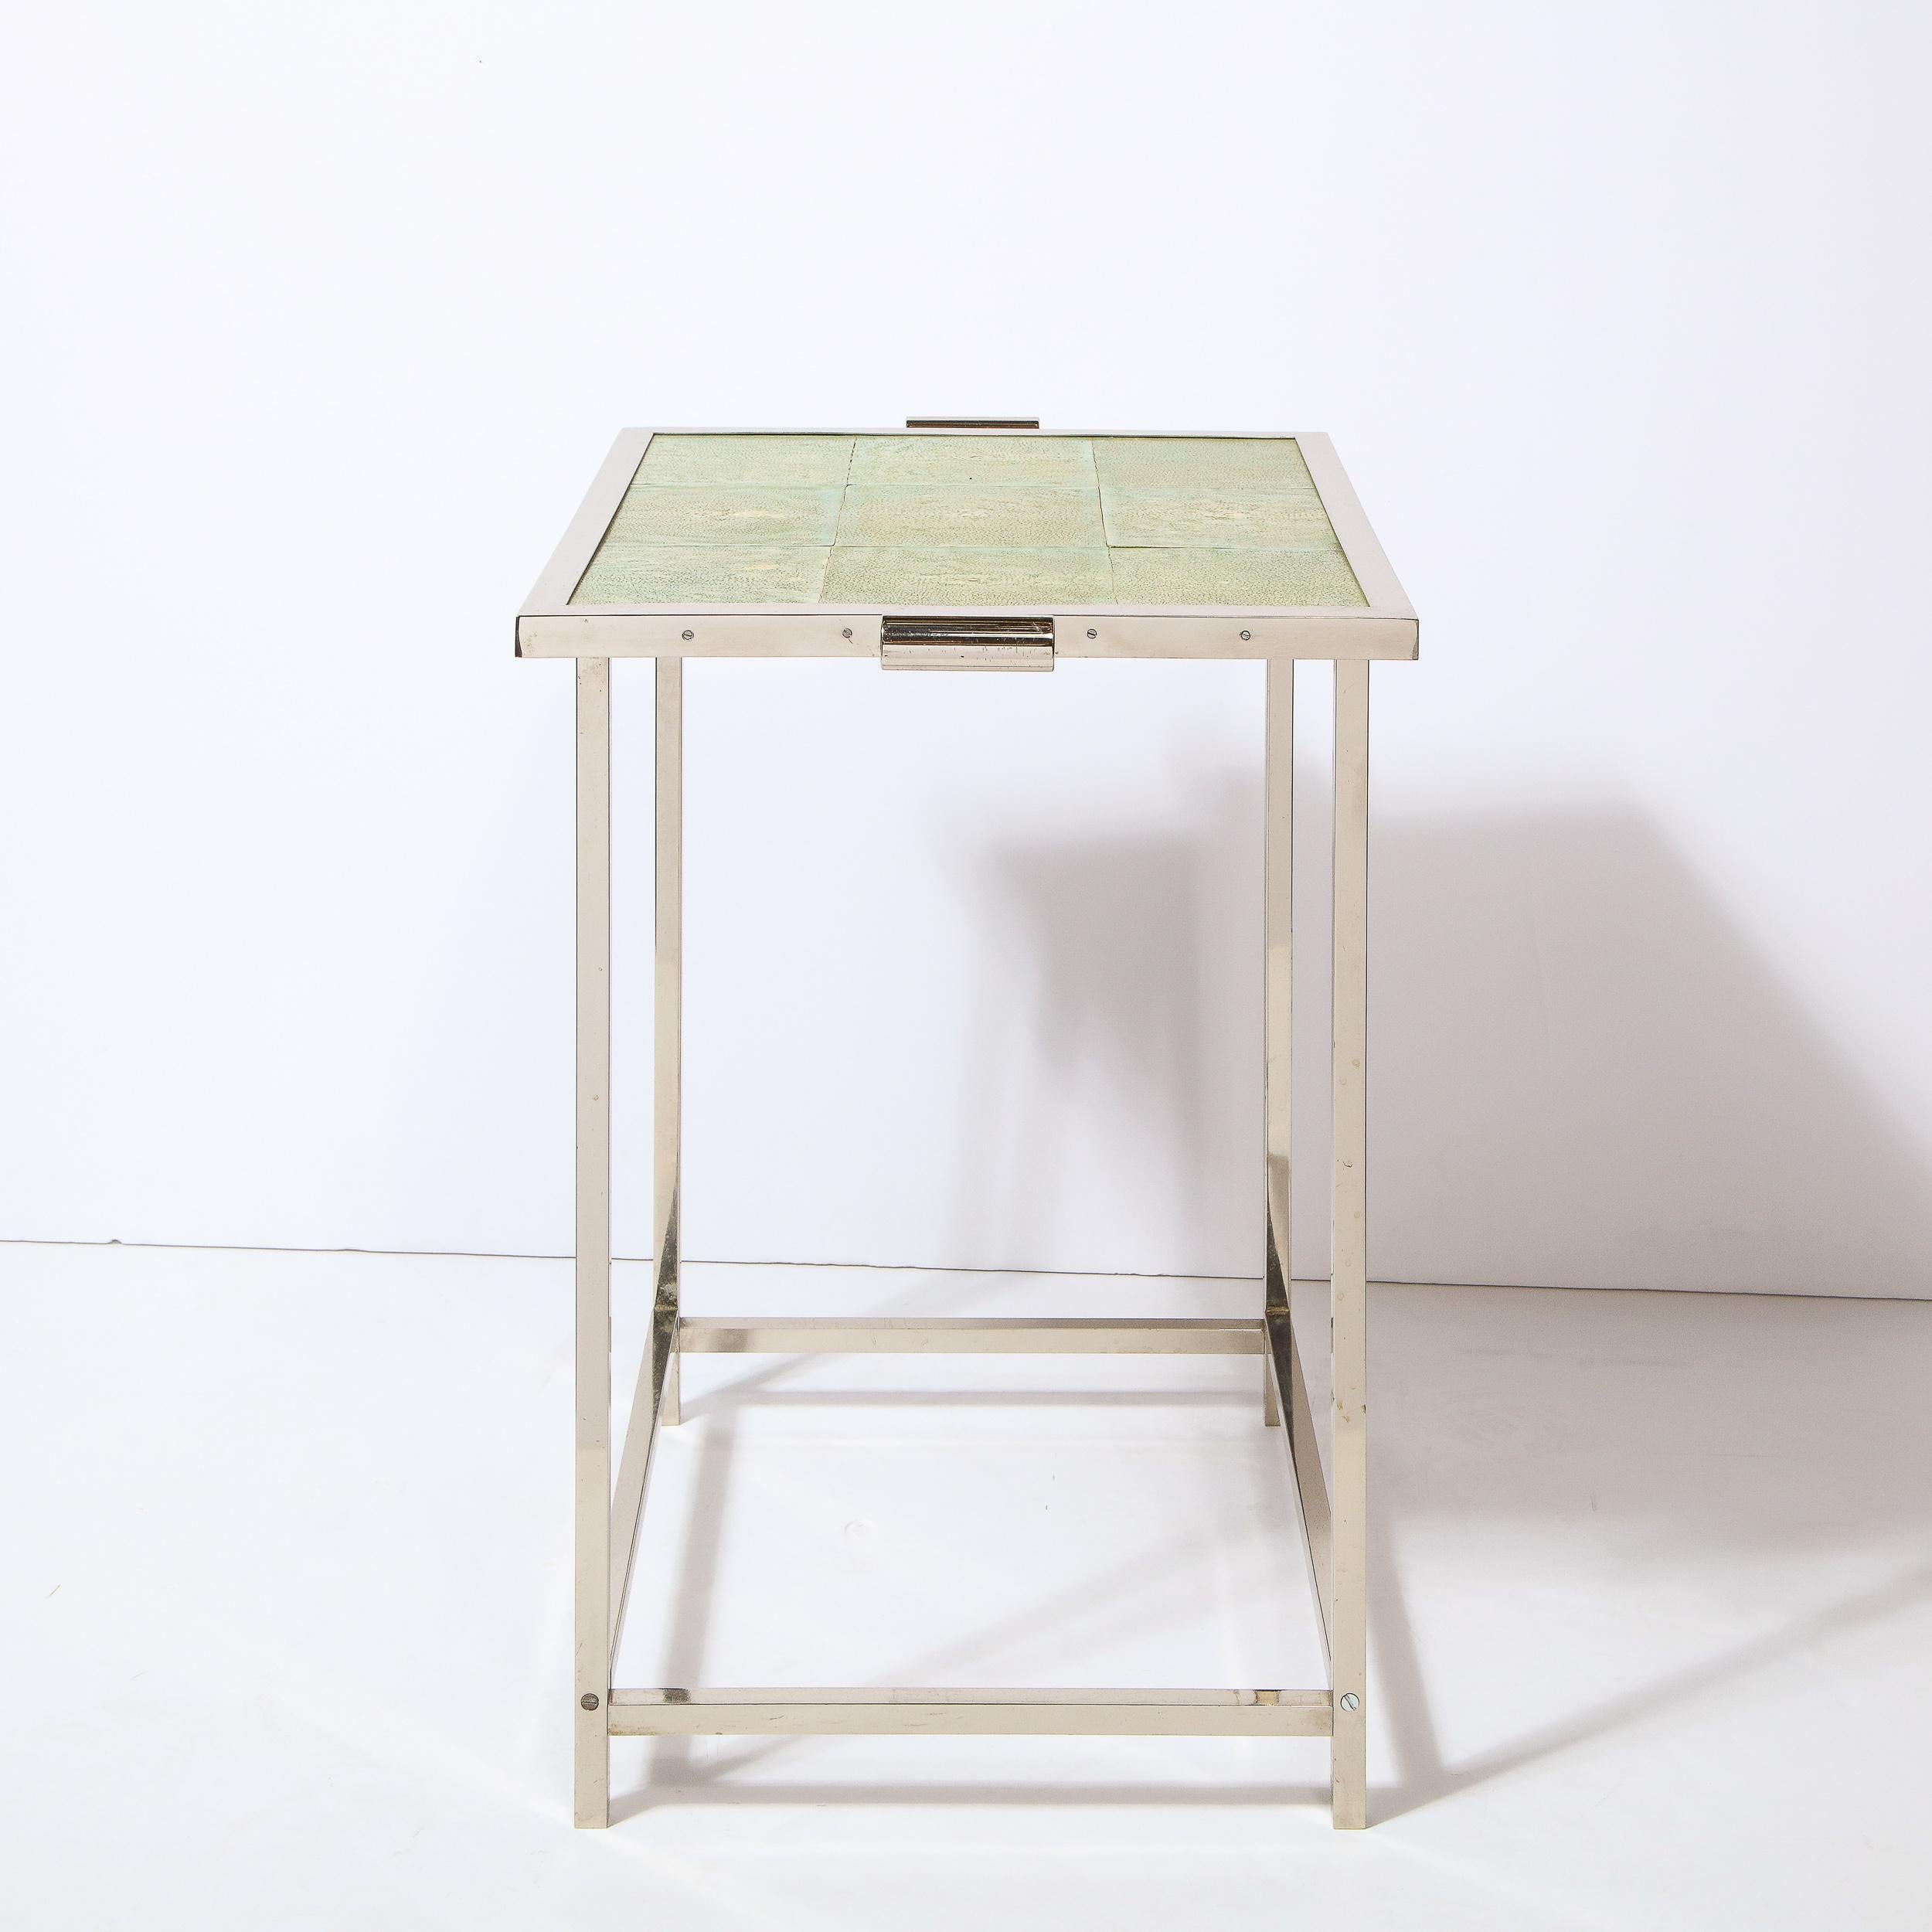 Art Deco Revival Modernist Polished Aluminum Side Table with Shagreen Top 4